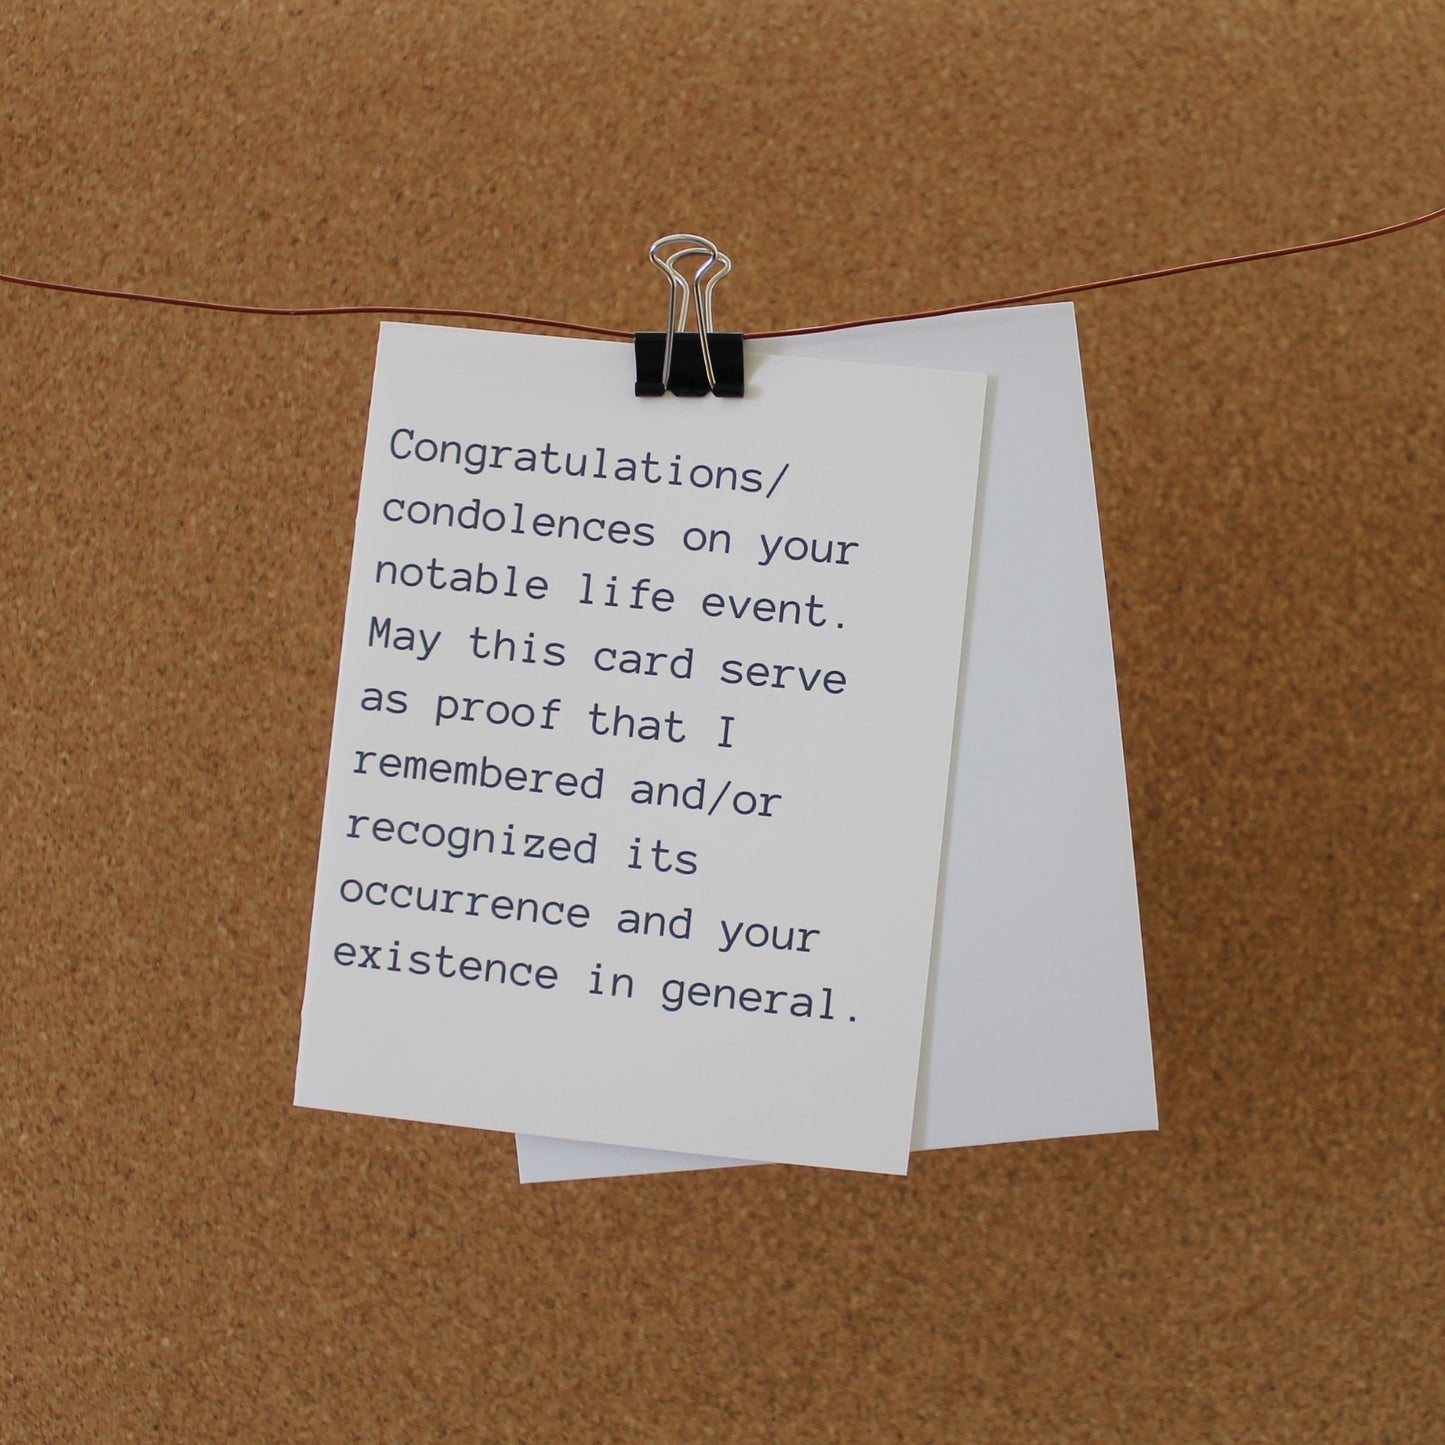 Funny Card: "Congratulations/condolences on your recent notable life event. May this card serve as proof that I remembered and/or recognized its occurrence and your existence in general."